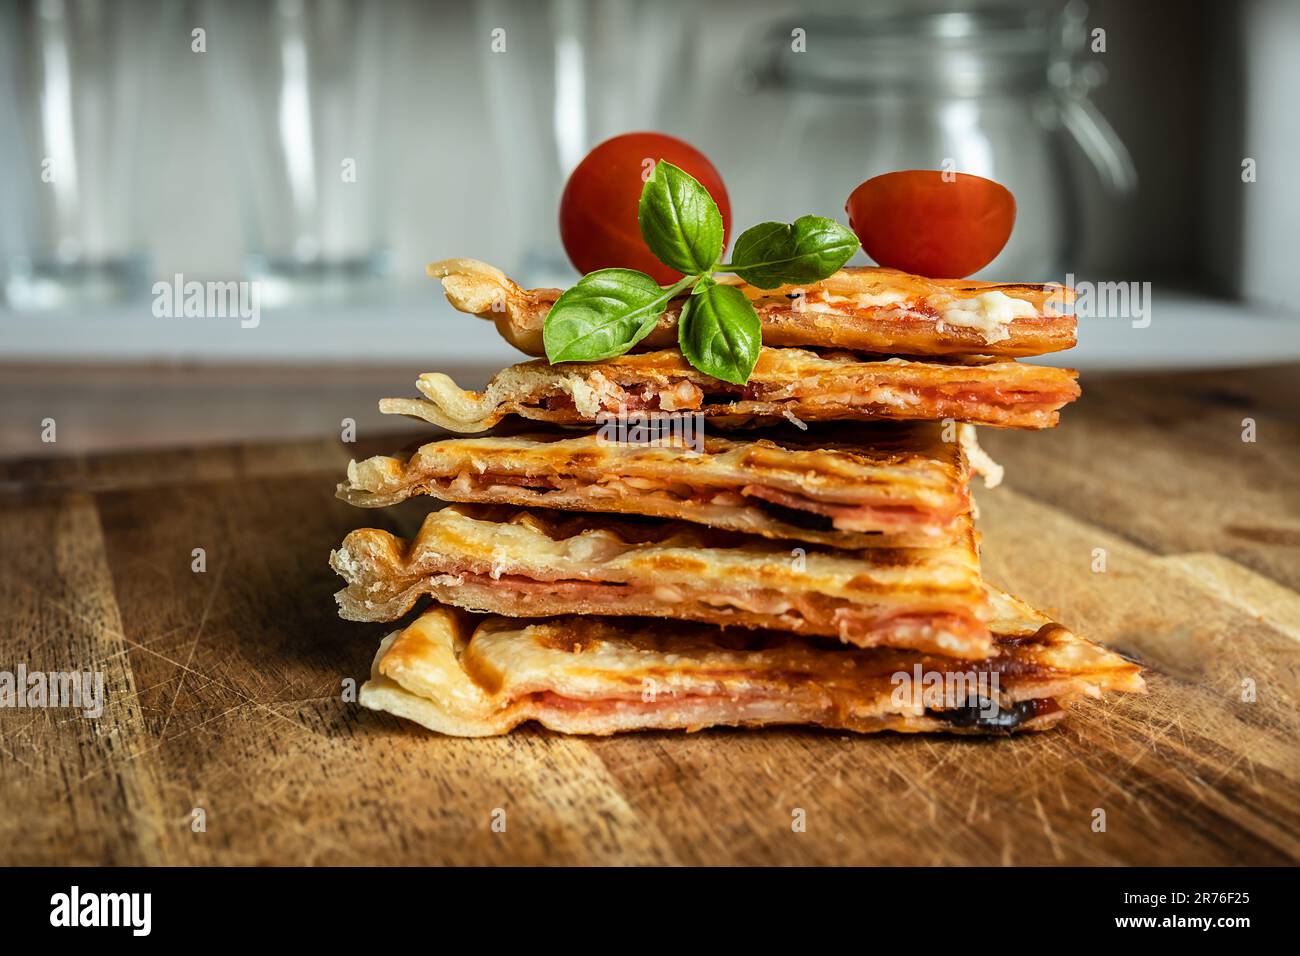 Hybrid food - pizza waffle with tomato sauce, pepperoni, olives and parmesan cheese Stock Photo